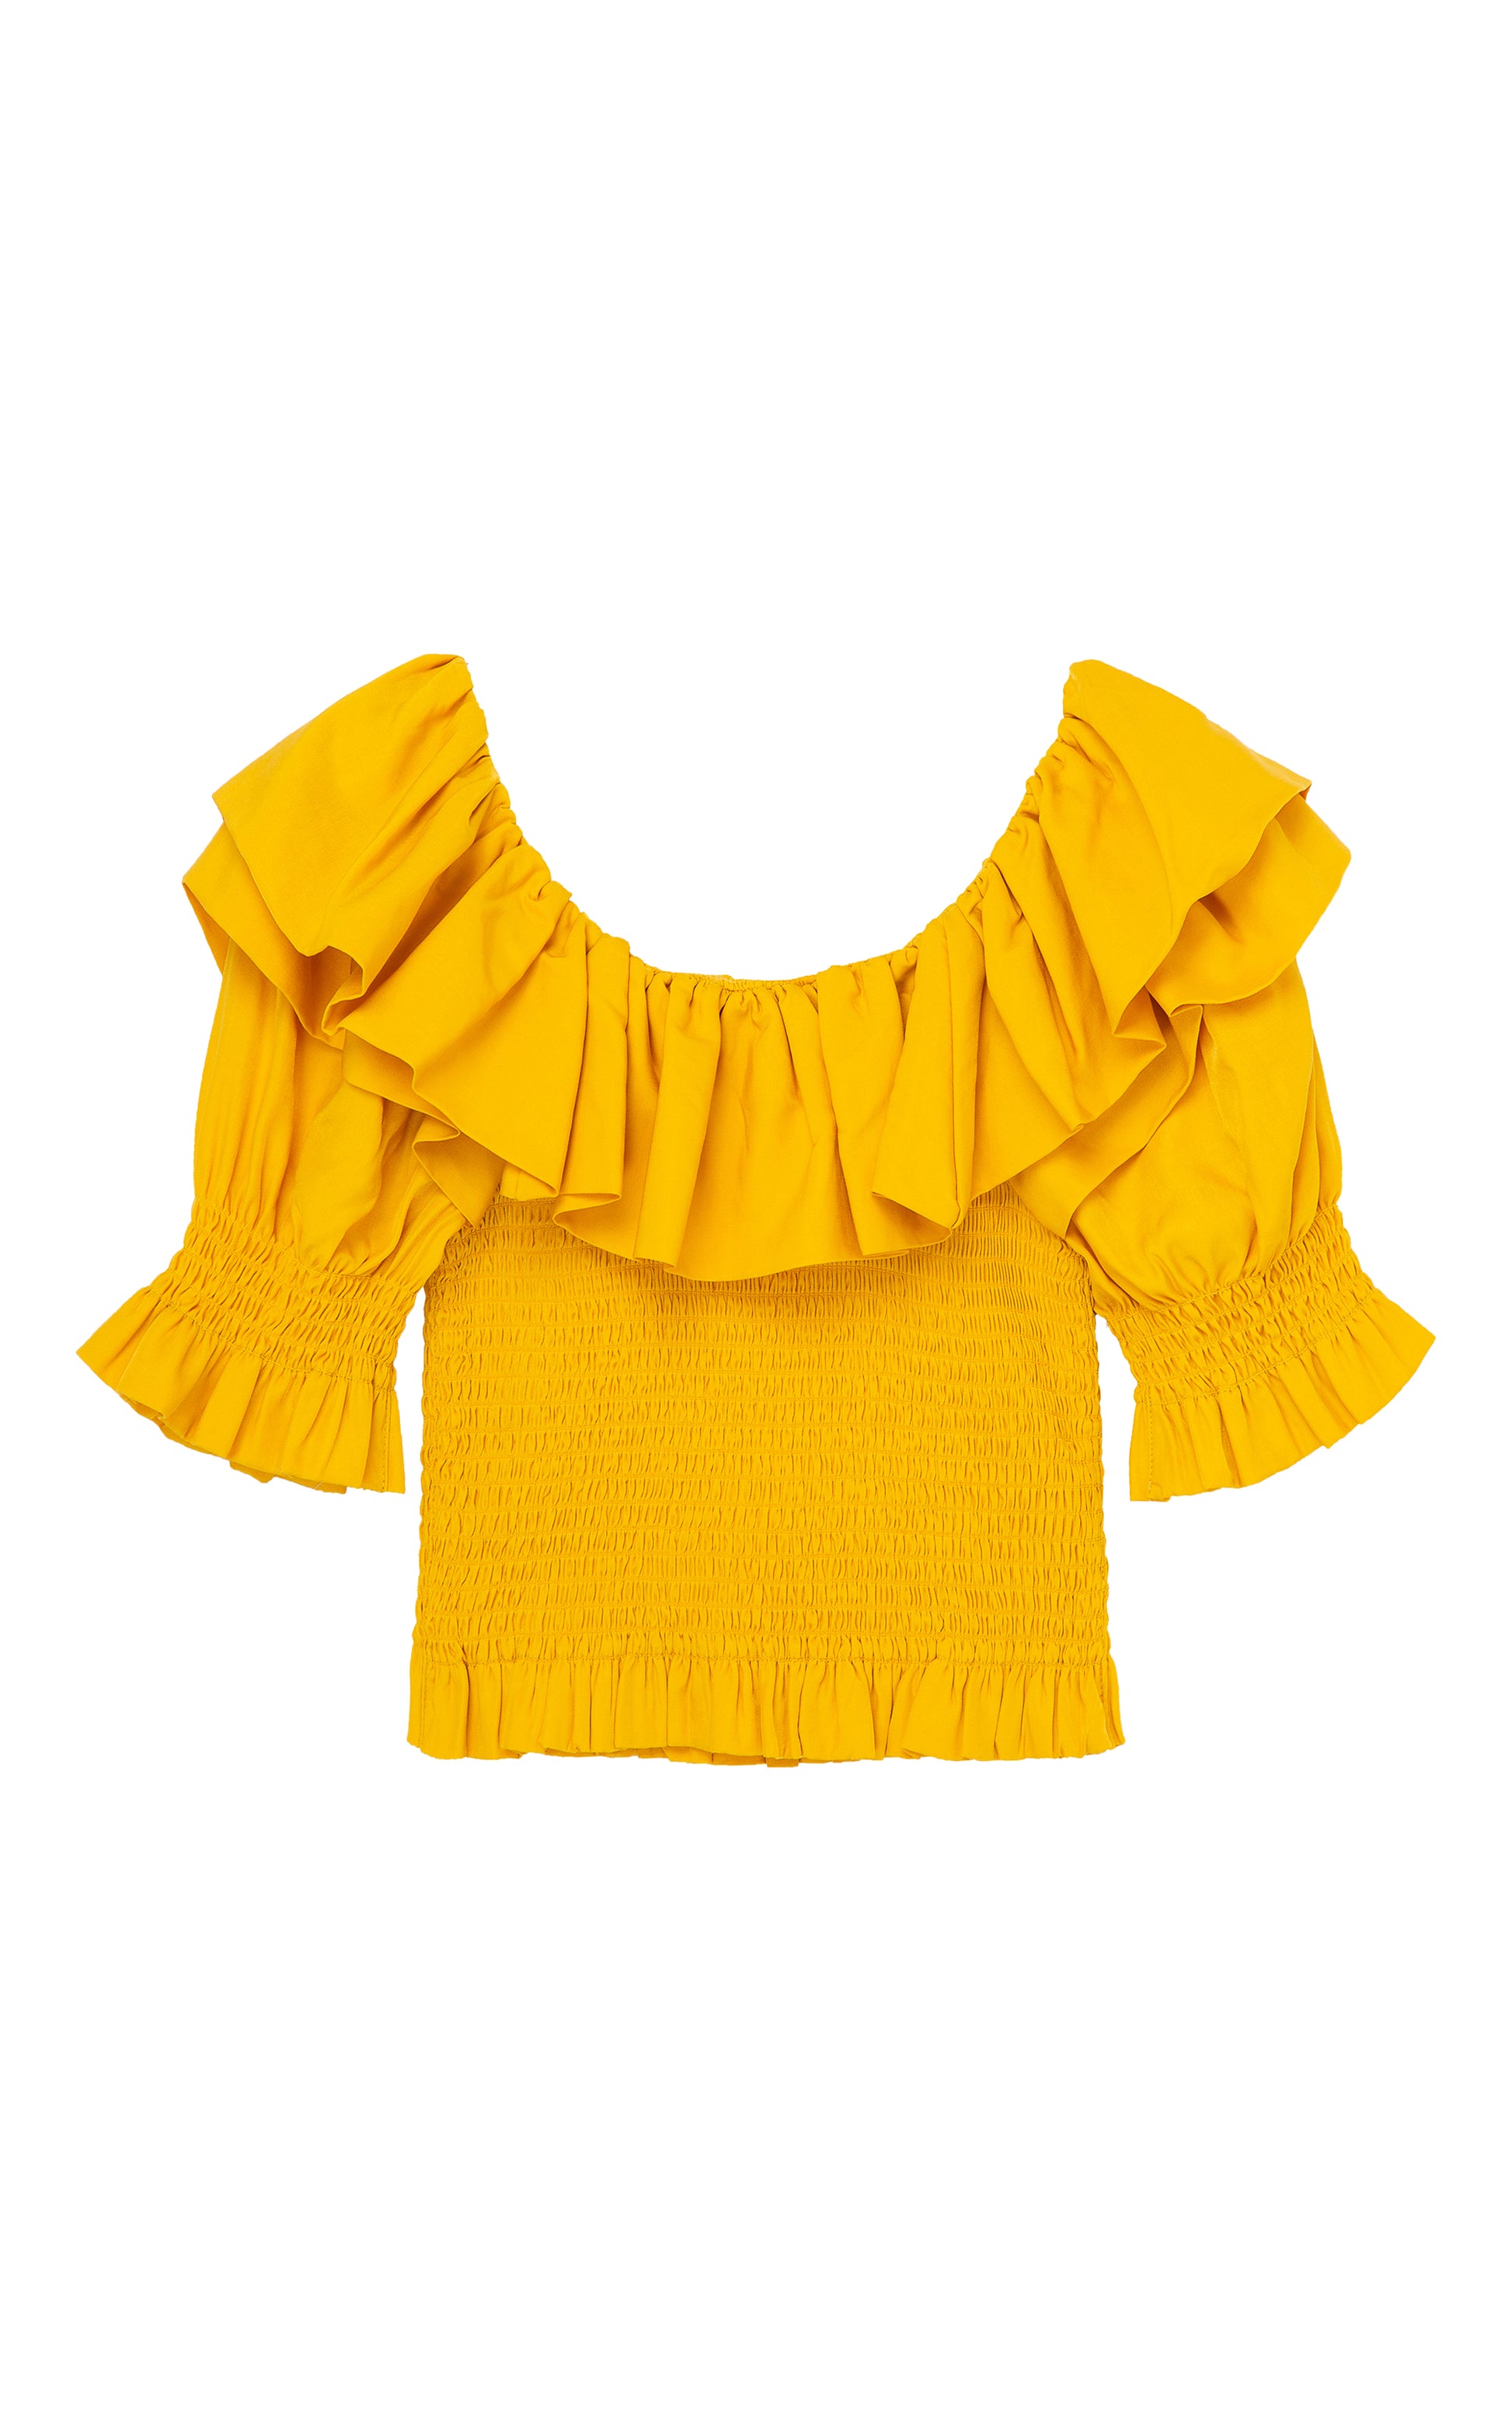 BACK OF YELLOW THREE-QUARTER-LENGTH SLEEVE TOP WITH A WIDE RUFFLED NECKLINE AND A SMOCKED BODICE